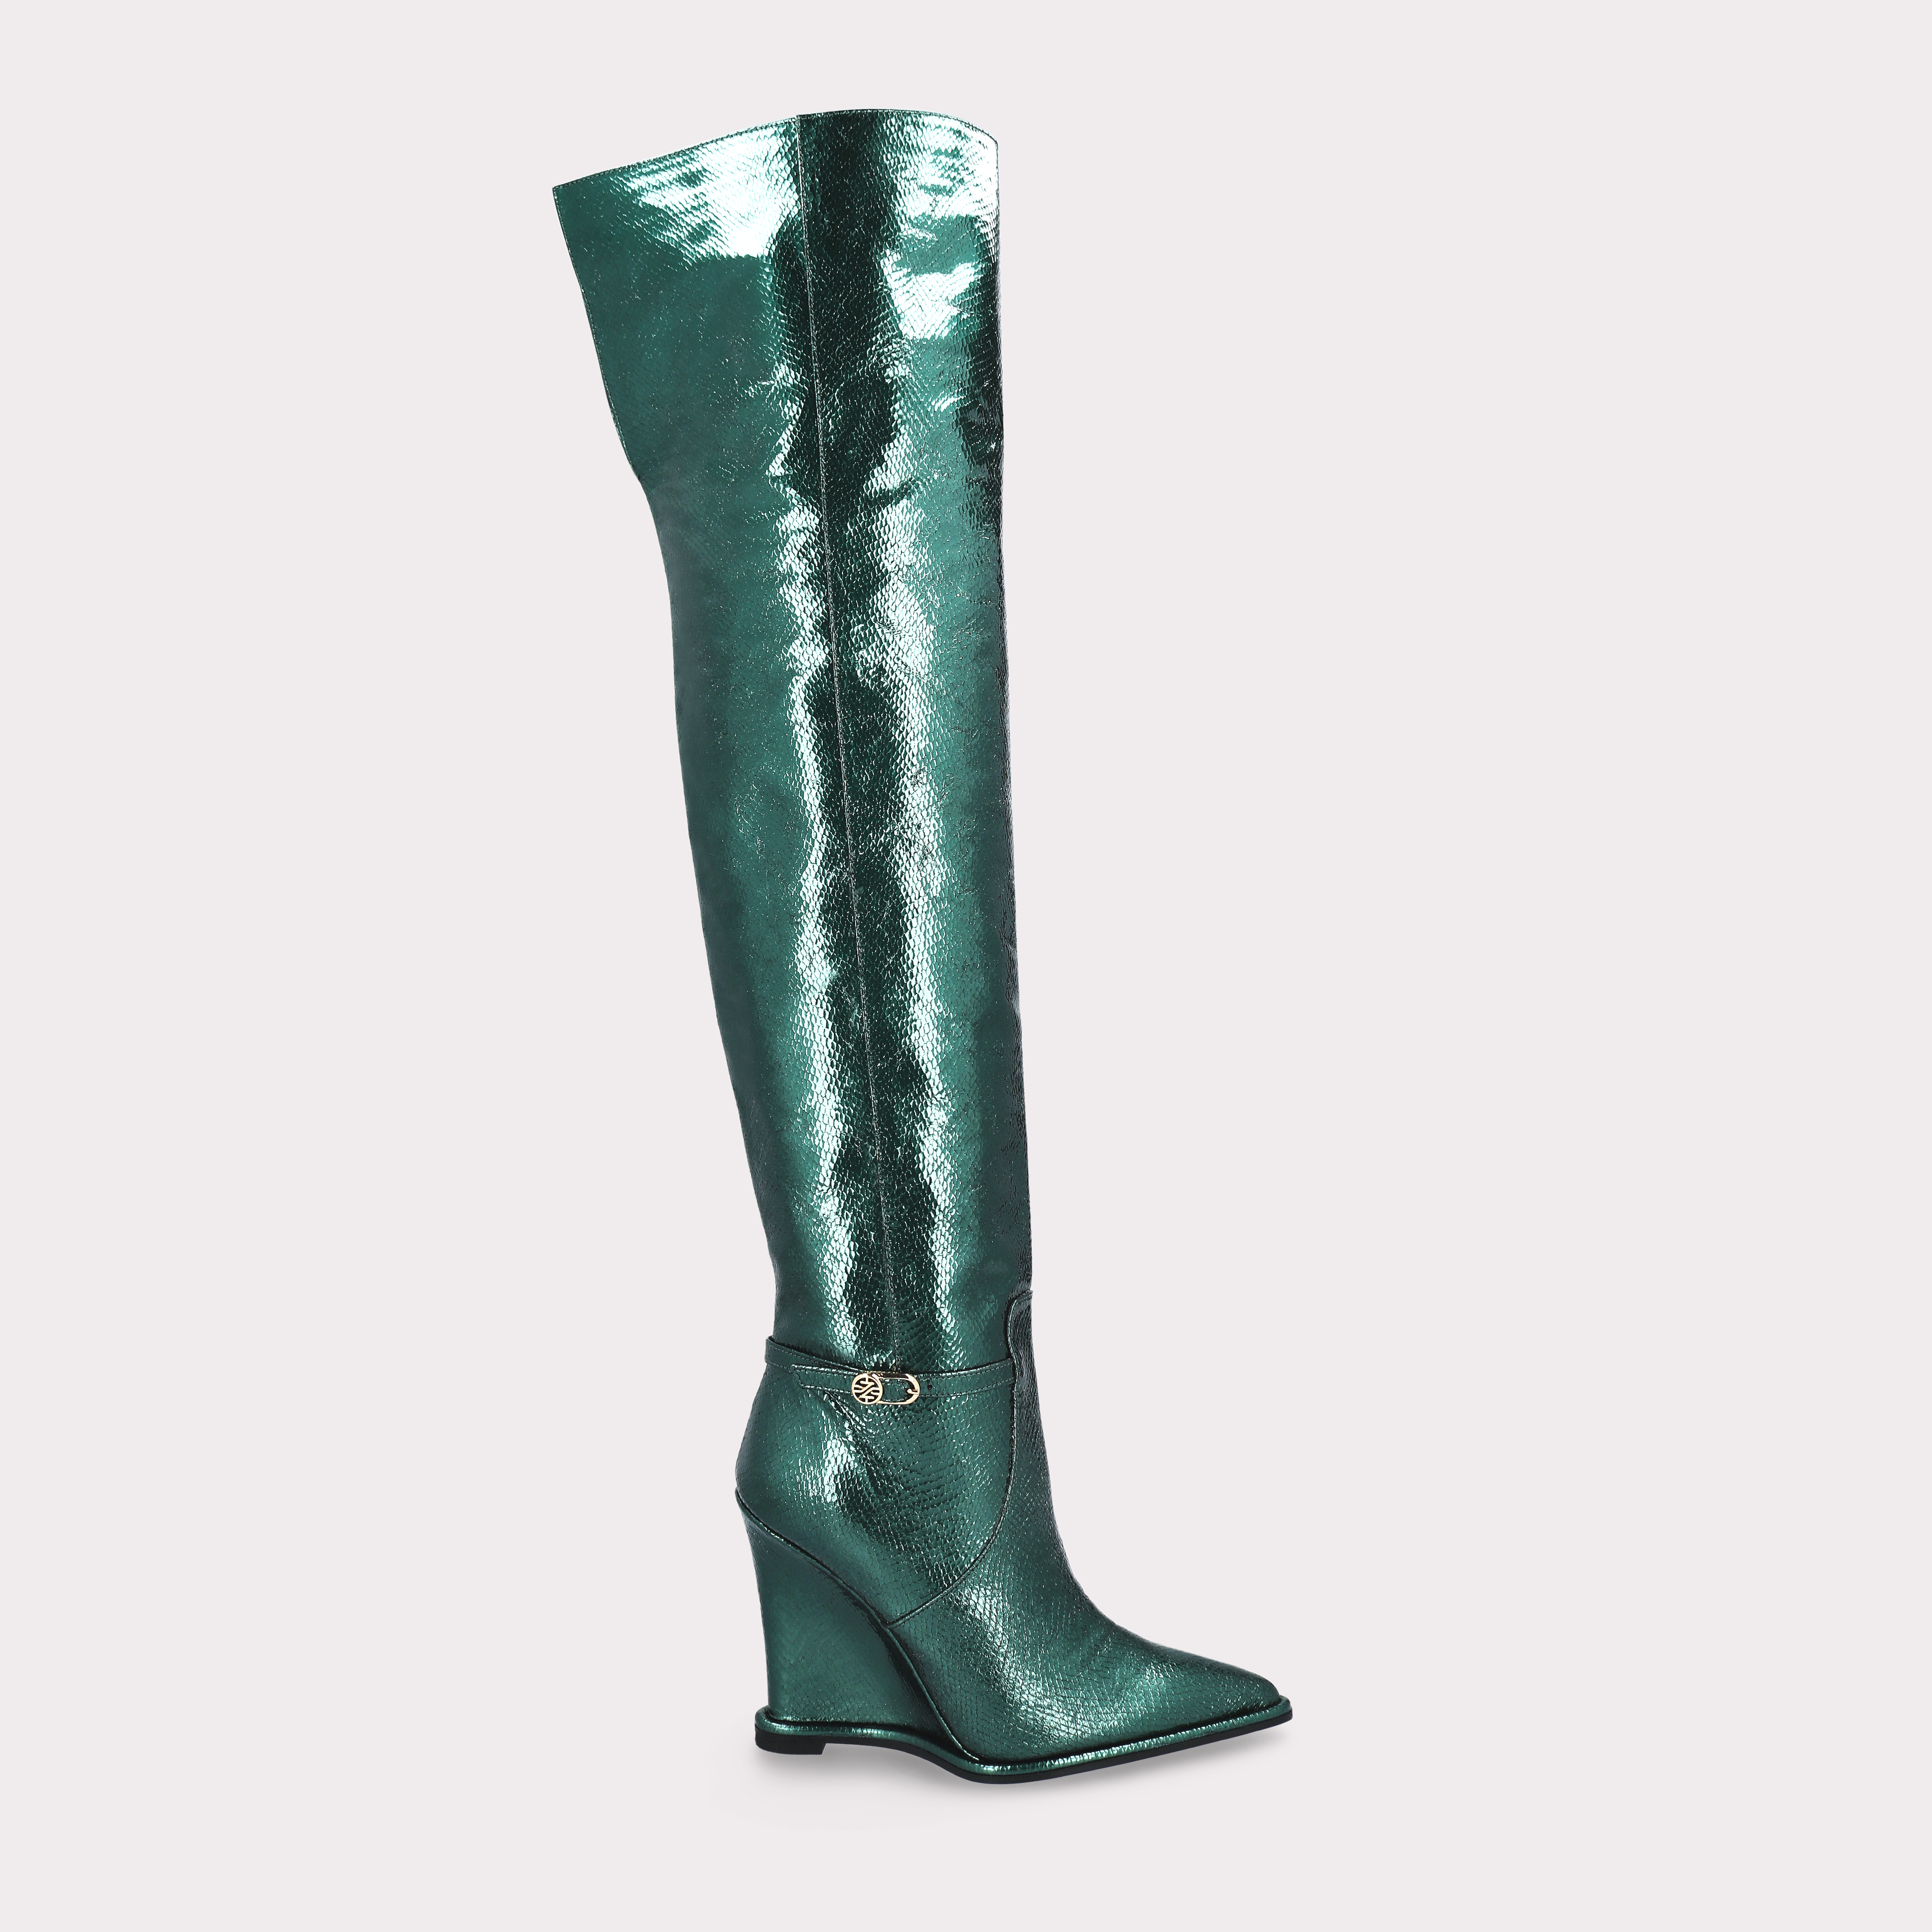 MONA LISA 02 MOS GREEN MINI VIPER EMBOSSED LEATHER BOOTS